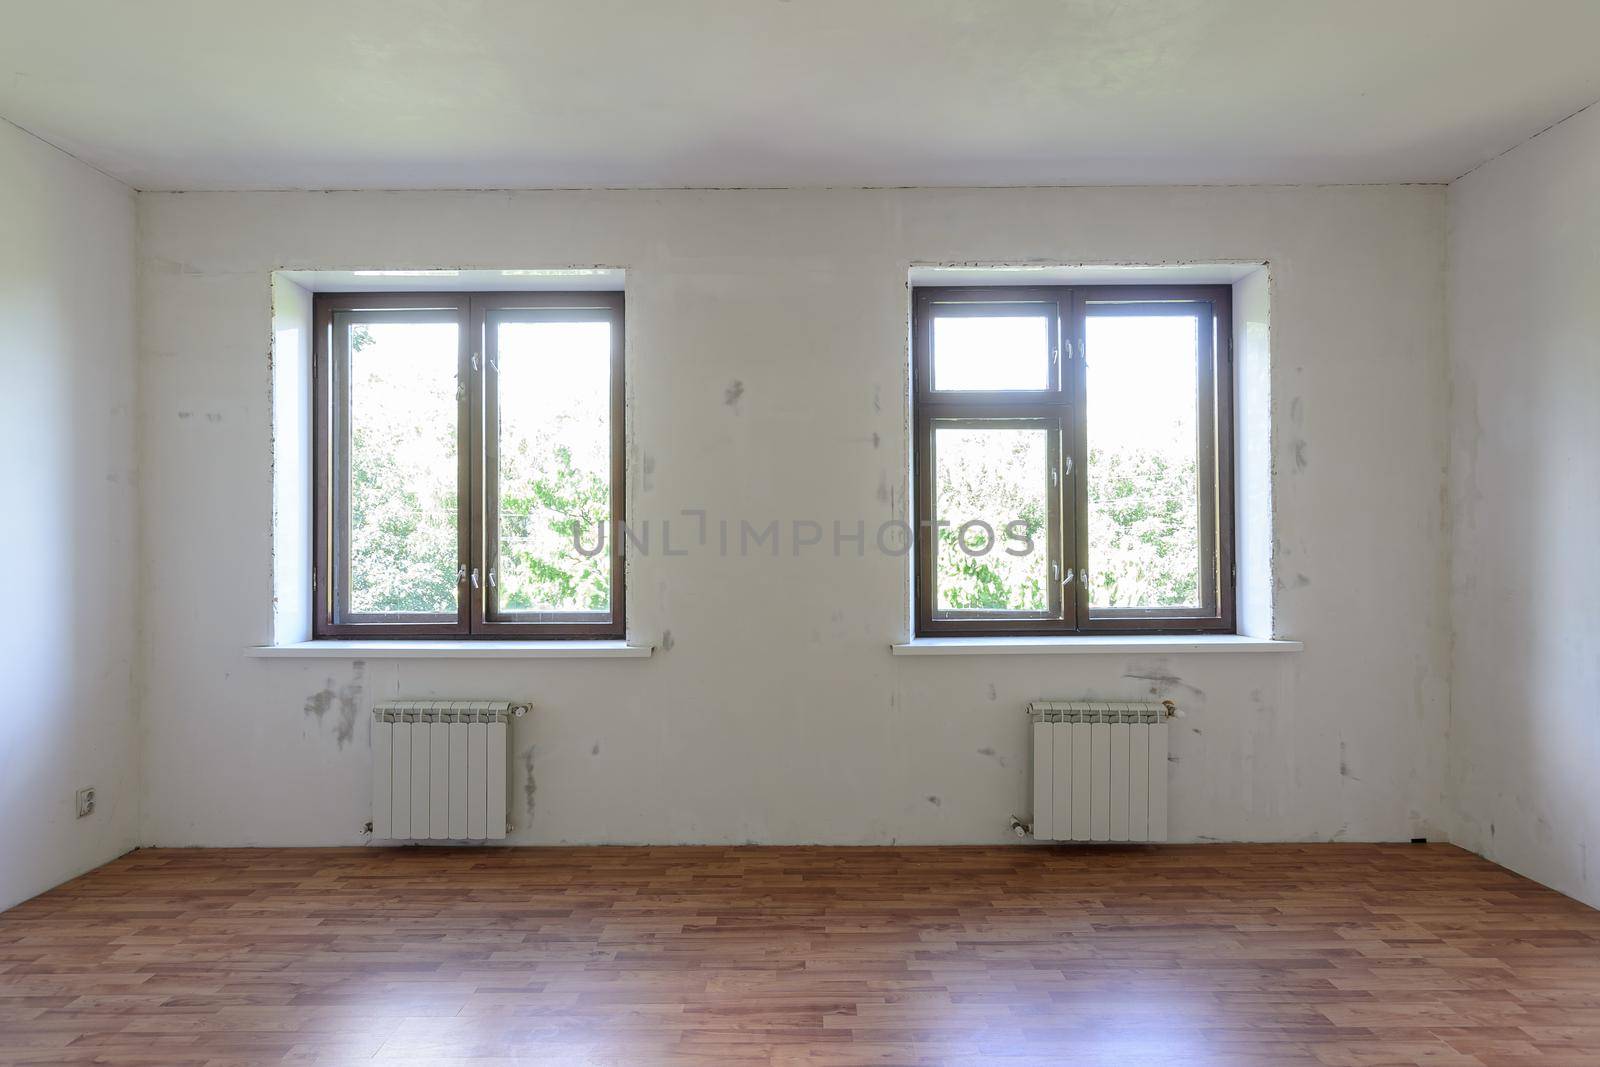 View of two windows in a room with a fine finish a